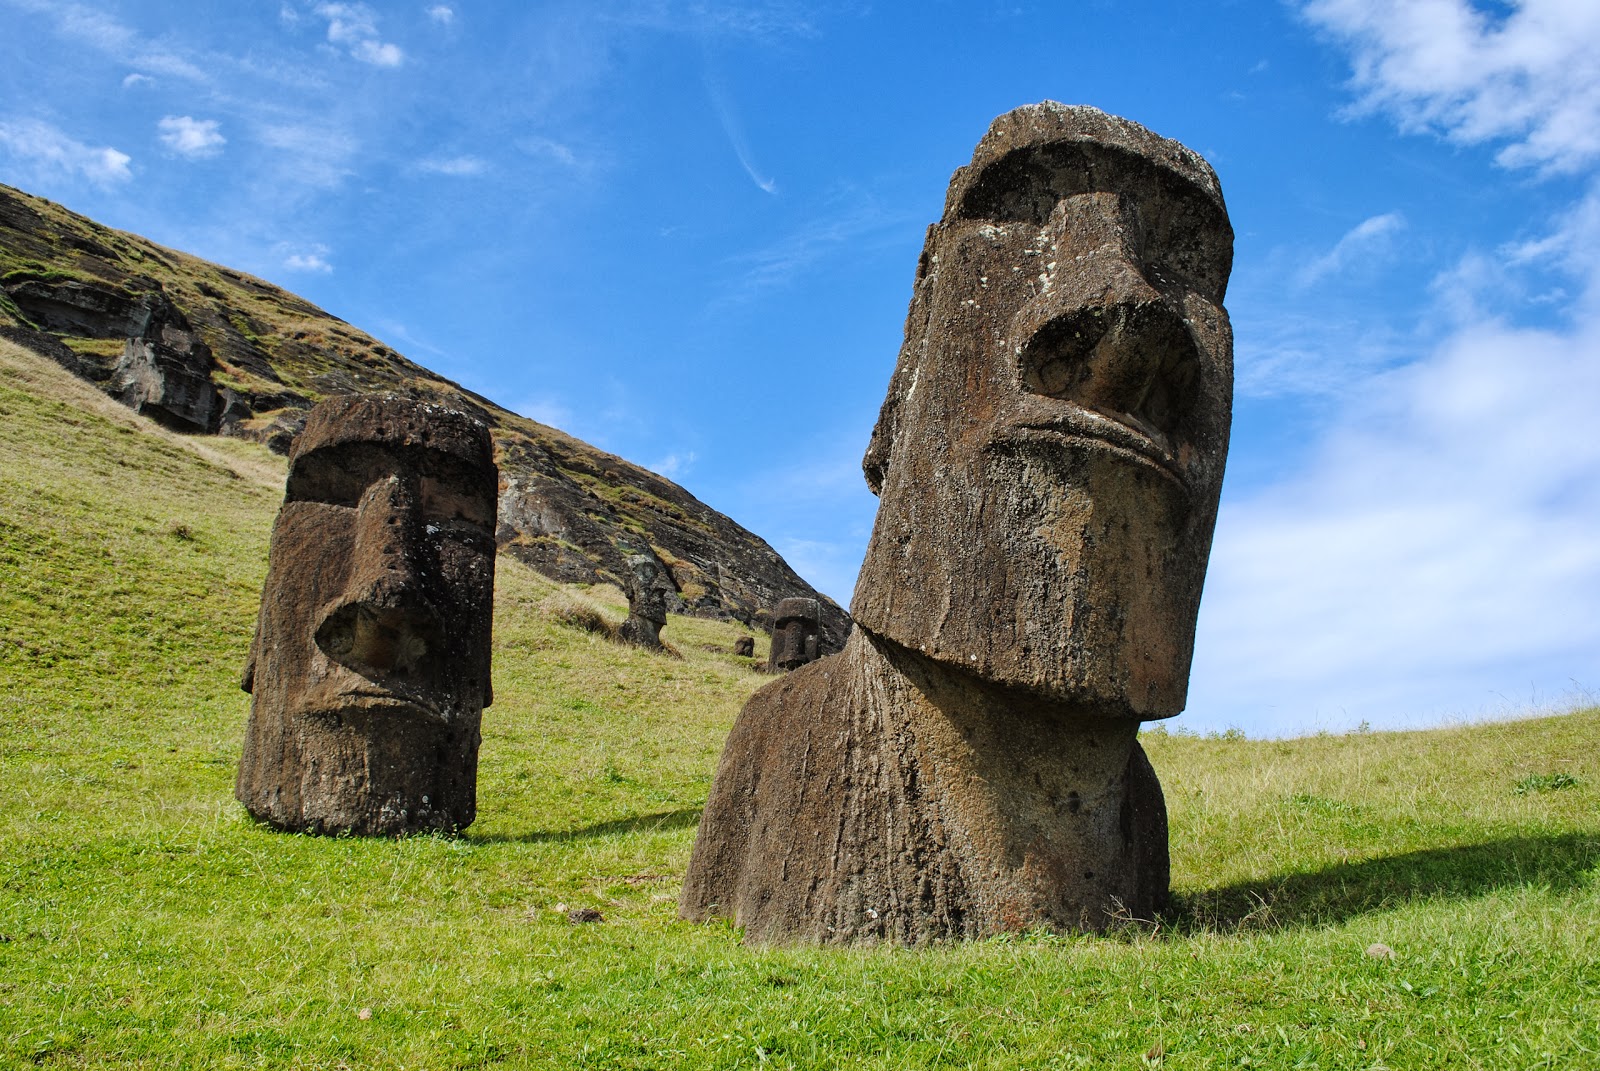 who built the giant stone statues on easter island and where did the easter island statues come from